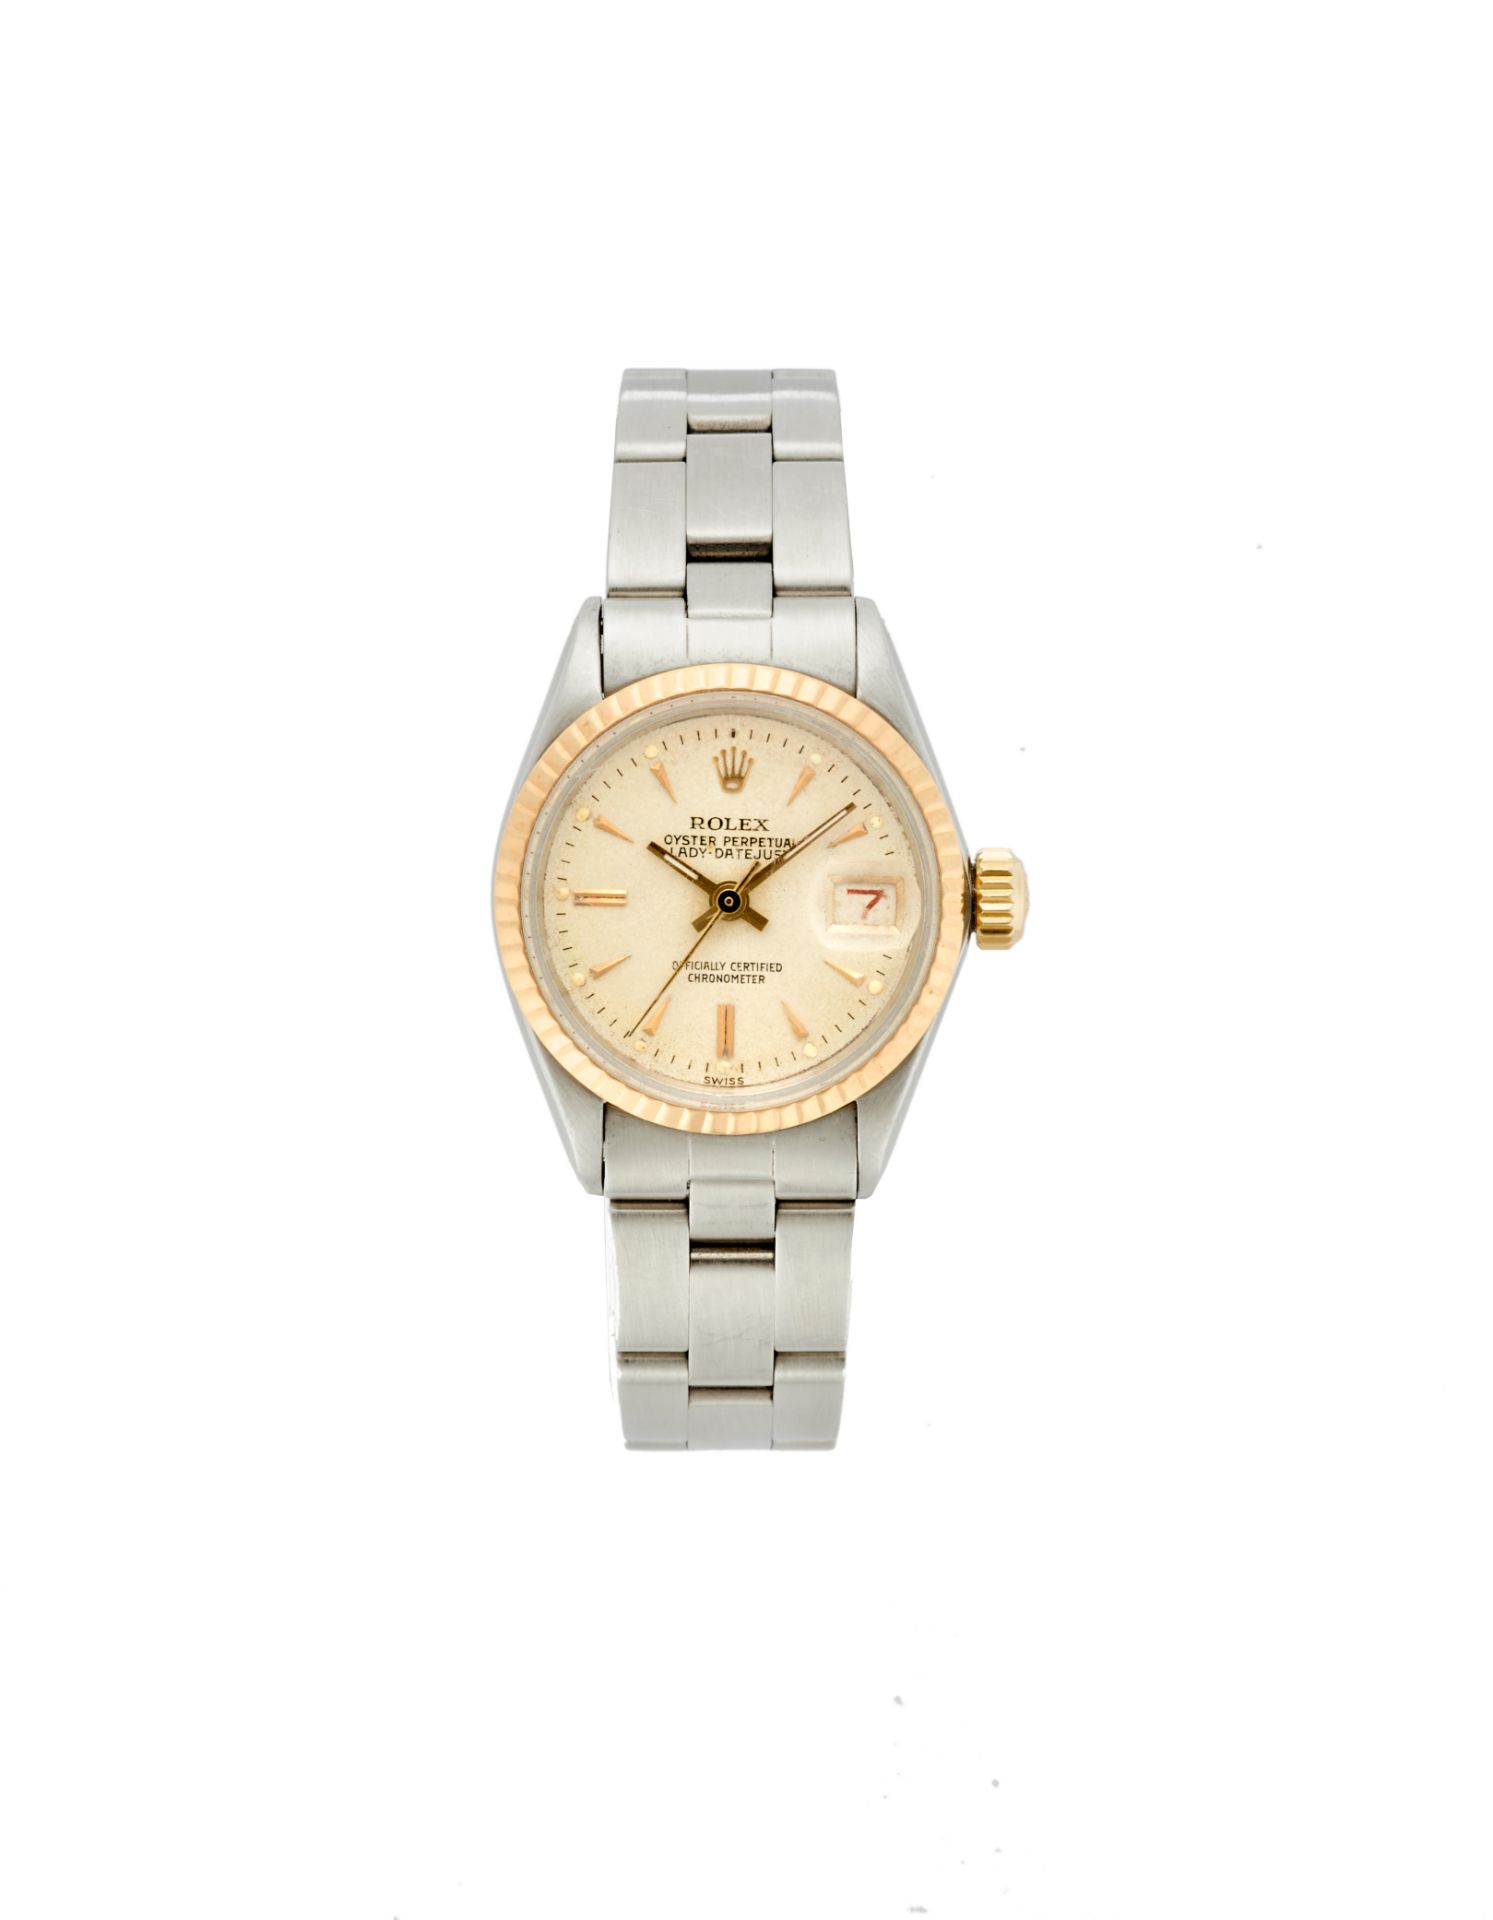 Rolex, Lady DateJust Ref. 6517Lady's steel and gold wristwatchYear 1968Dial, movement and case